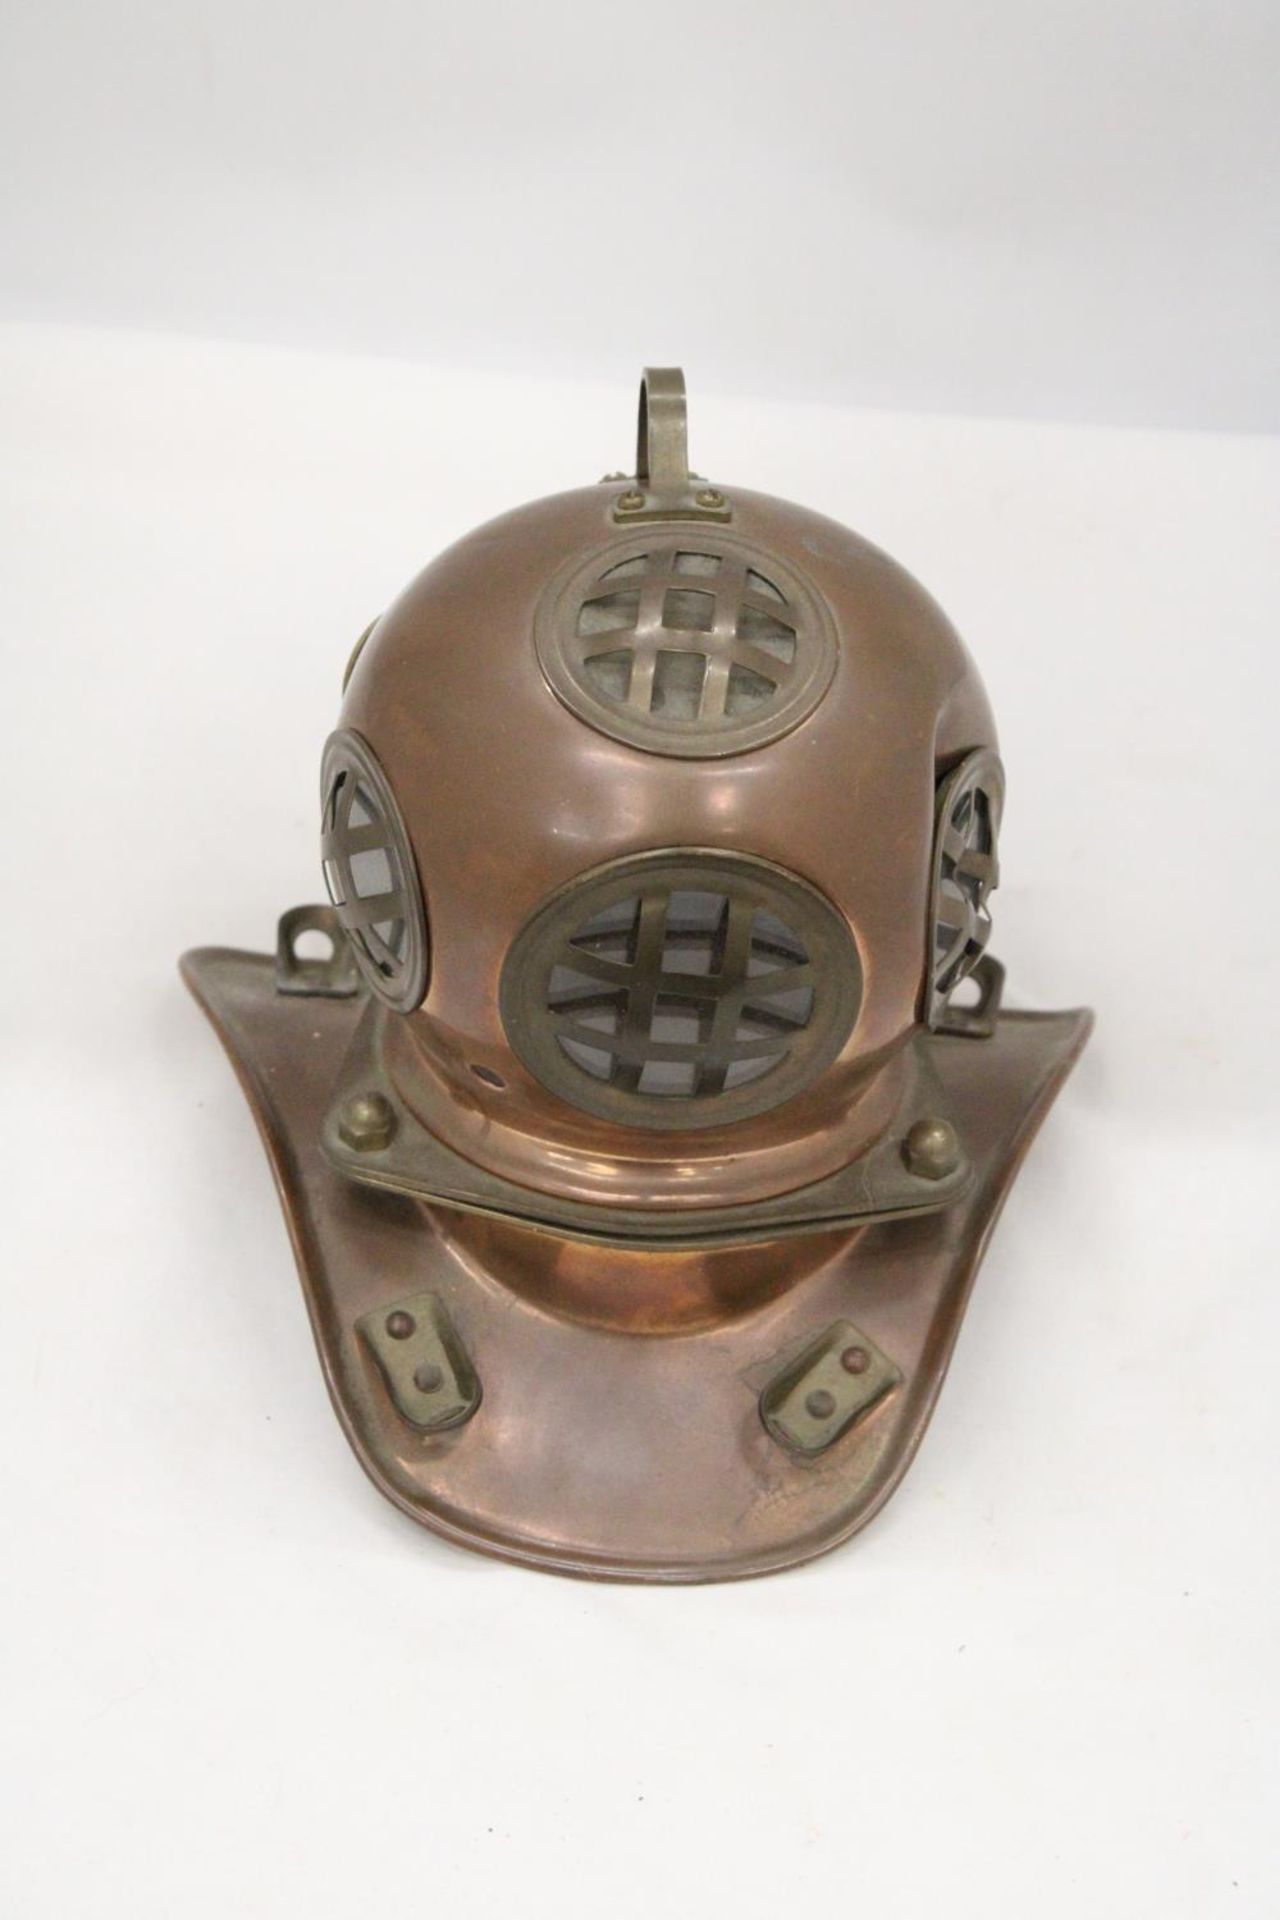 A VINTAGE COPPER AND BRASS DIVERS HELMET - Image 6 of 6